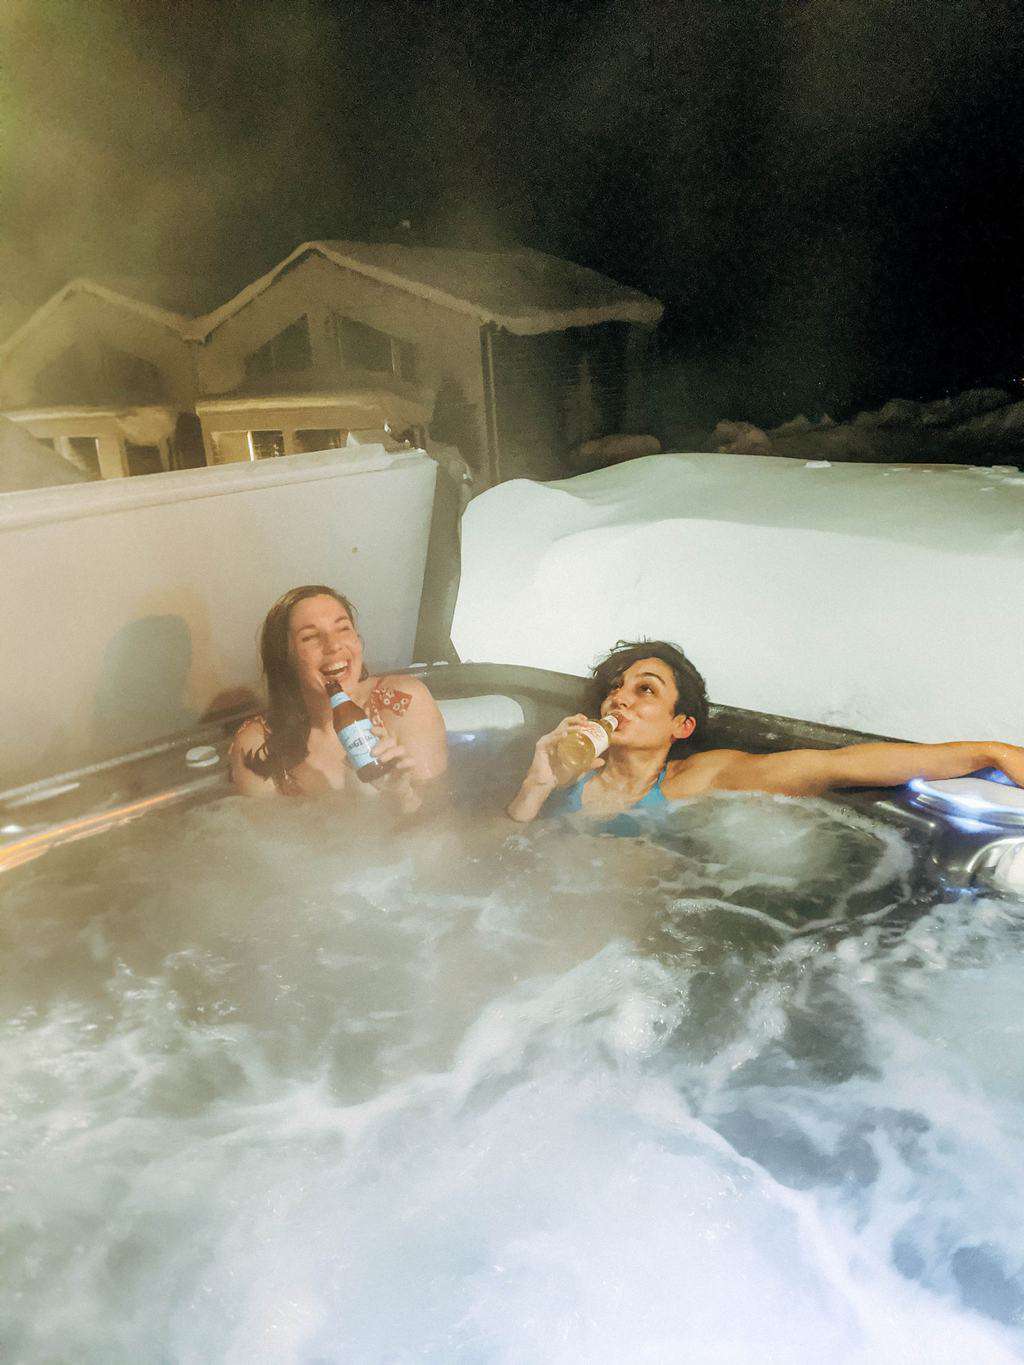 Two women enjoying a beer in a jacuzzi Finnish Lapland, Lapland destinations, Lapland Finland, Inghams